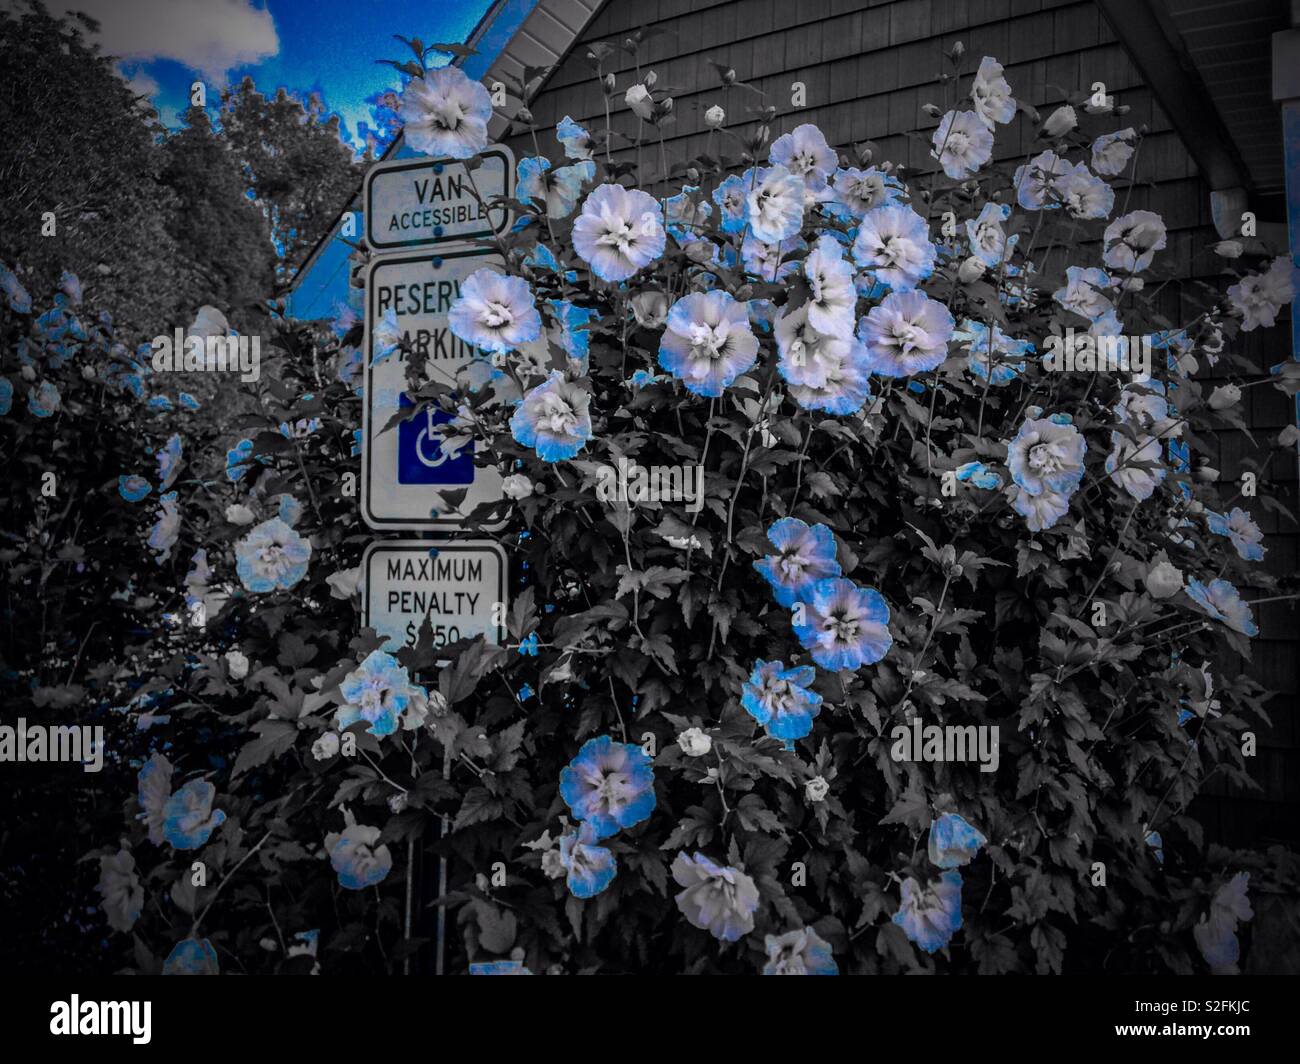 Hibiscus bush growing around a handicap parking sign with blue colorpop effect Stock Photo